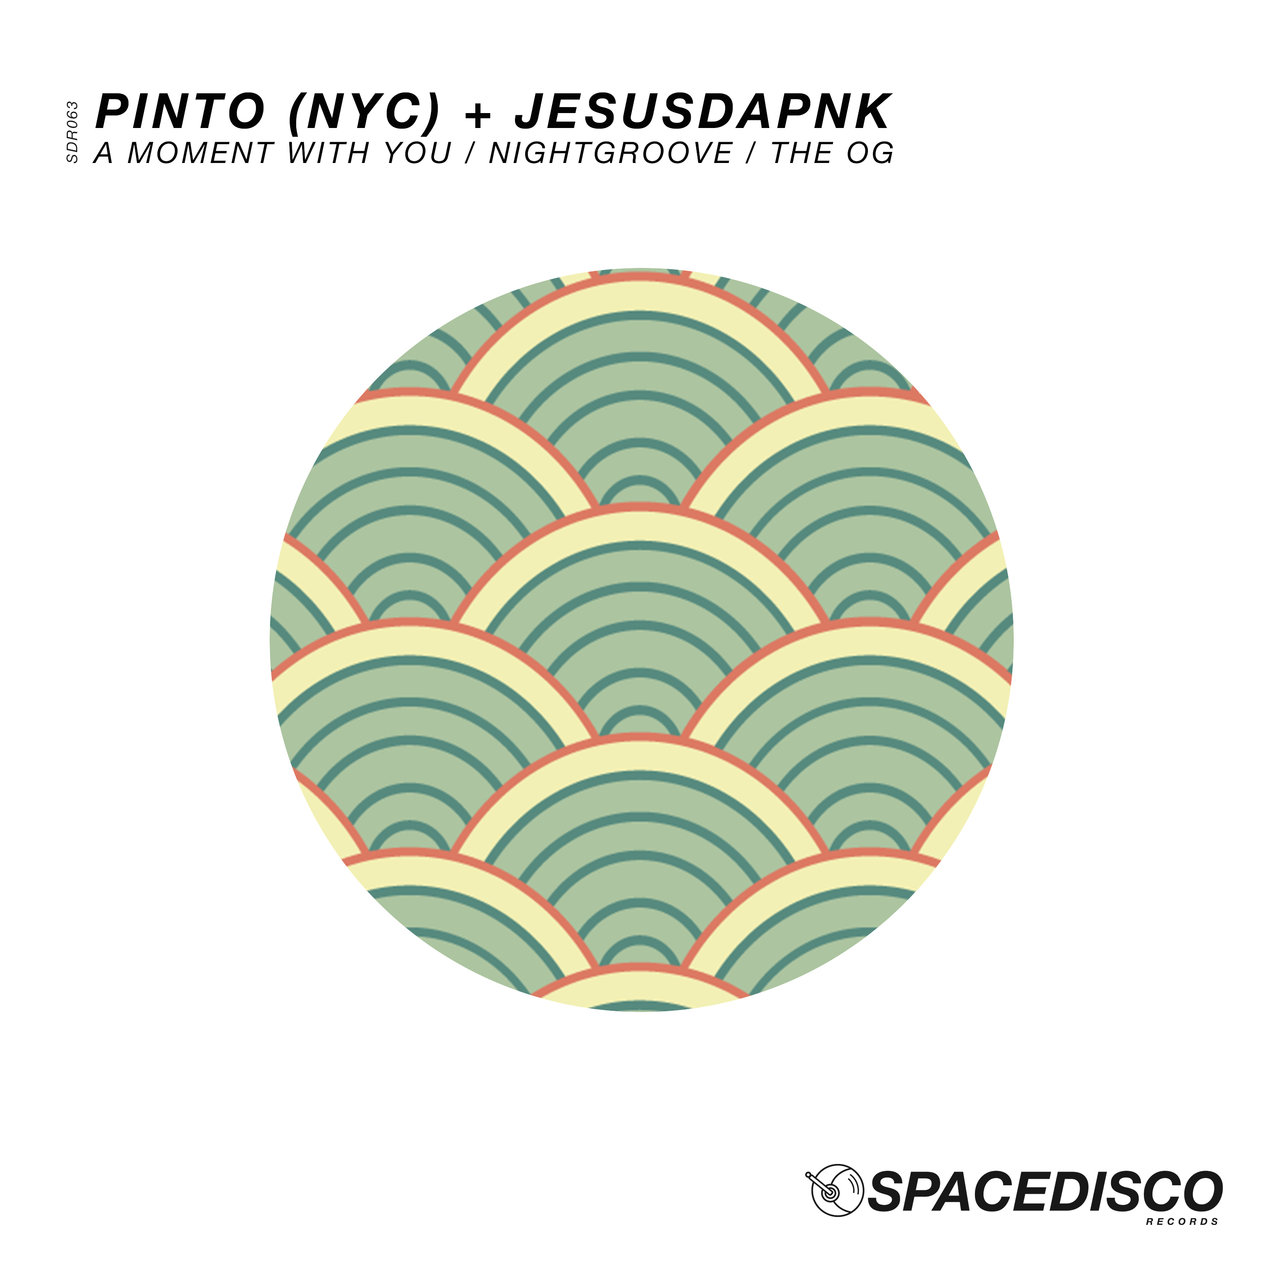 Pinto (NYC), Jesusdapnk - A Moment With You / Nightgroove / The OG / Spacedisco Records